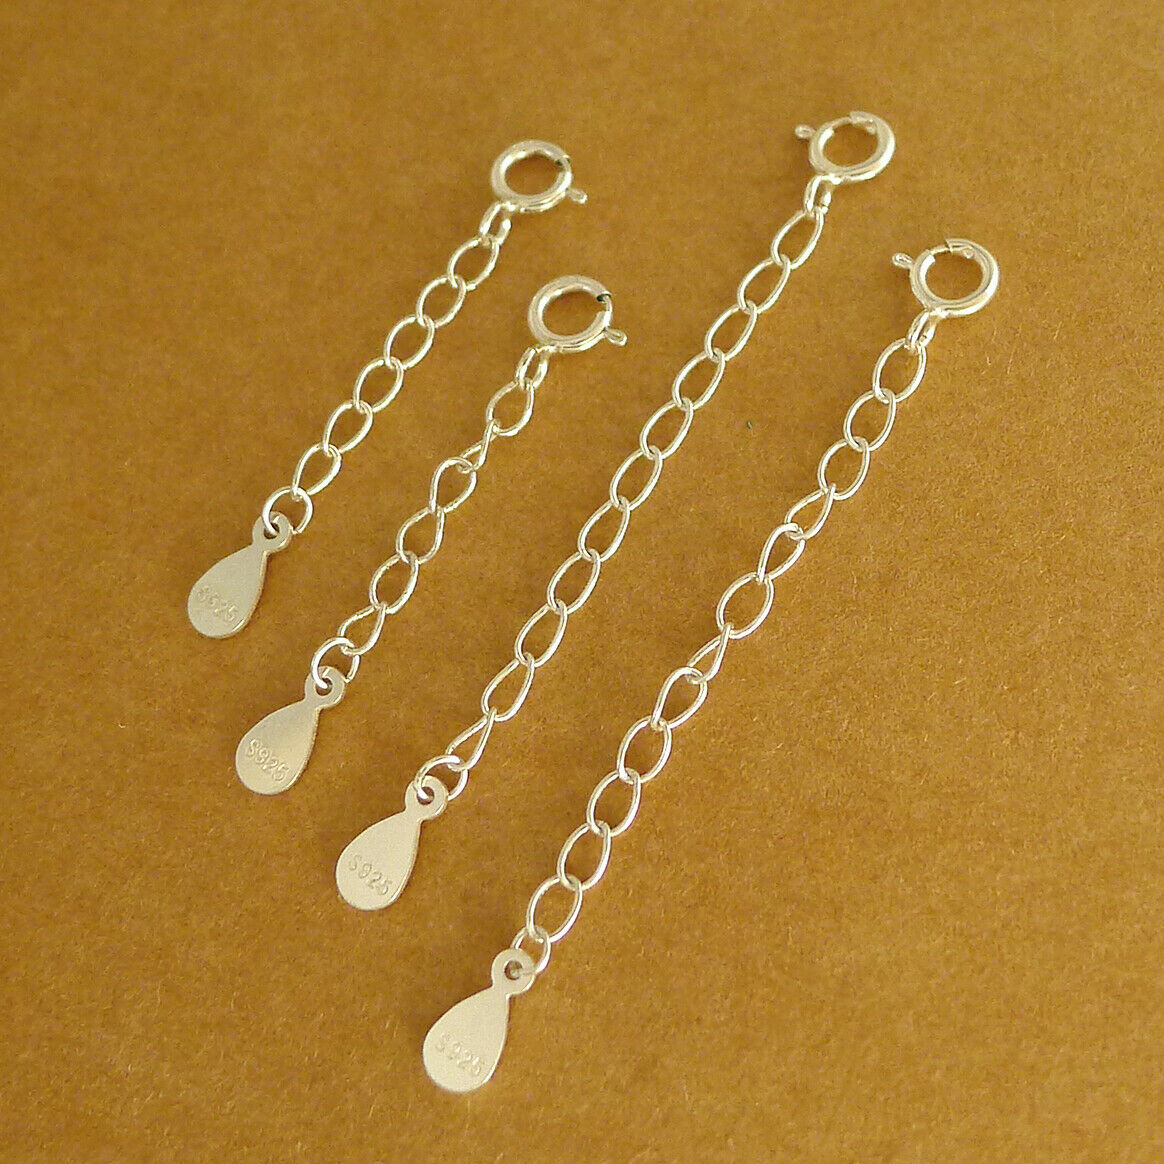 2 Sterling Silver Curb Extender Chain With Bolt Ring Clasp 3cm 5cm - sugarkittenlondon